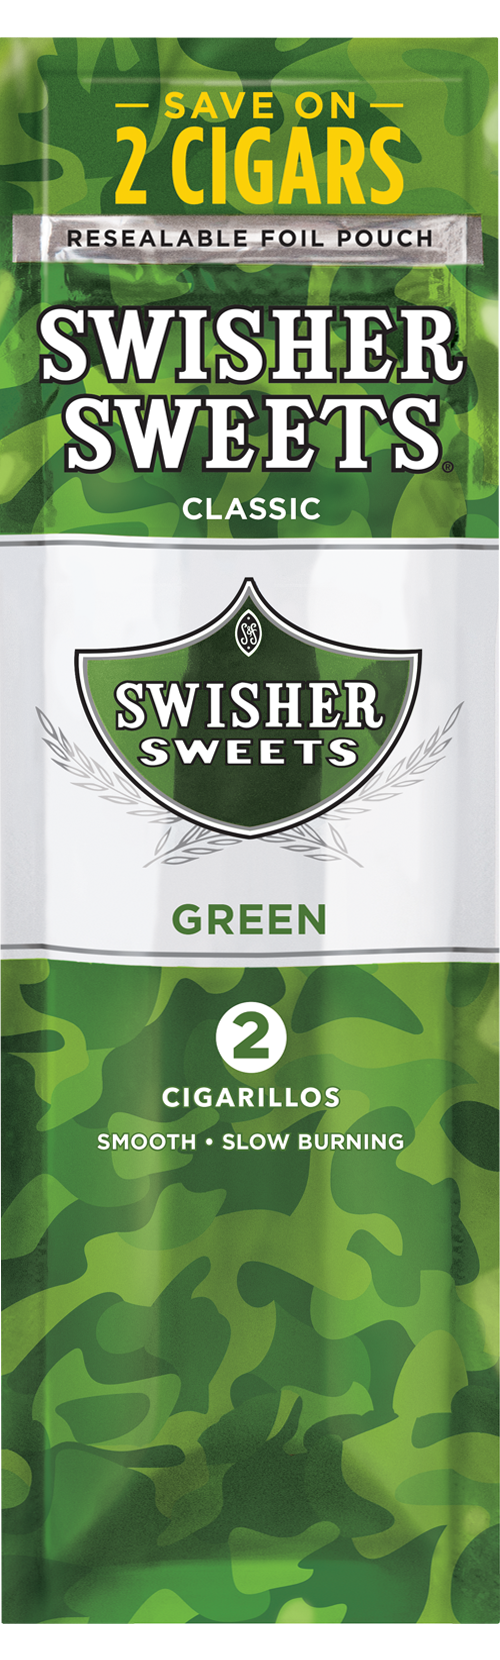 Swisher Sweets Cigarillos - Green Sweets